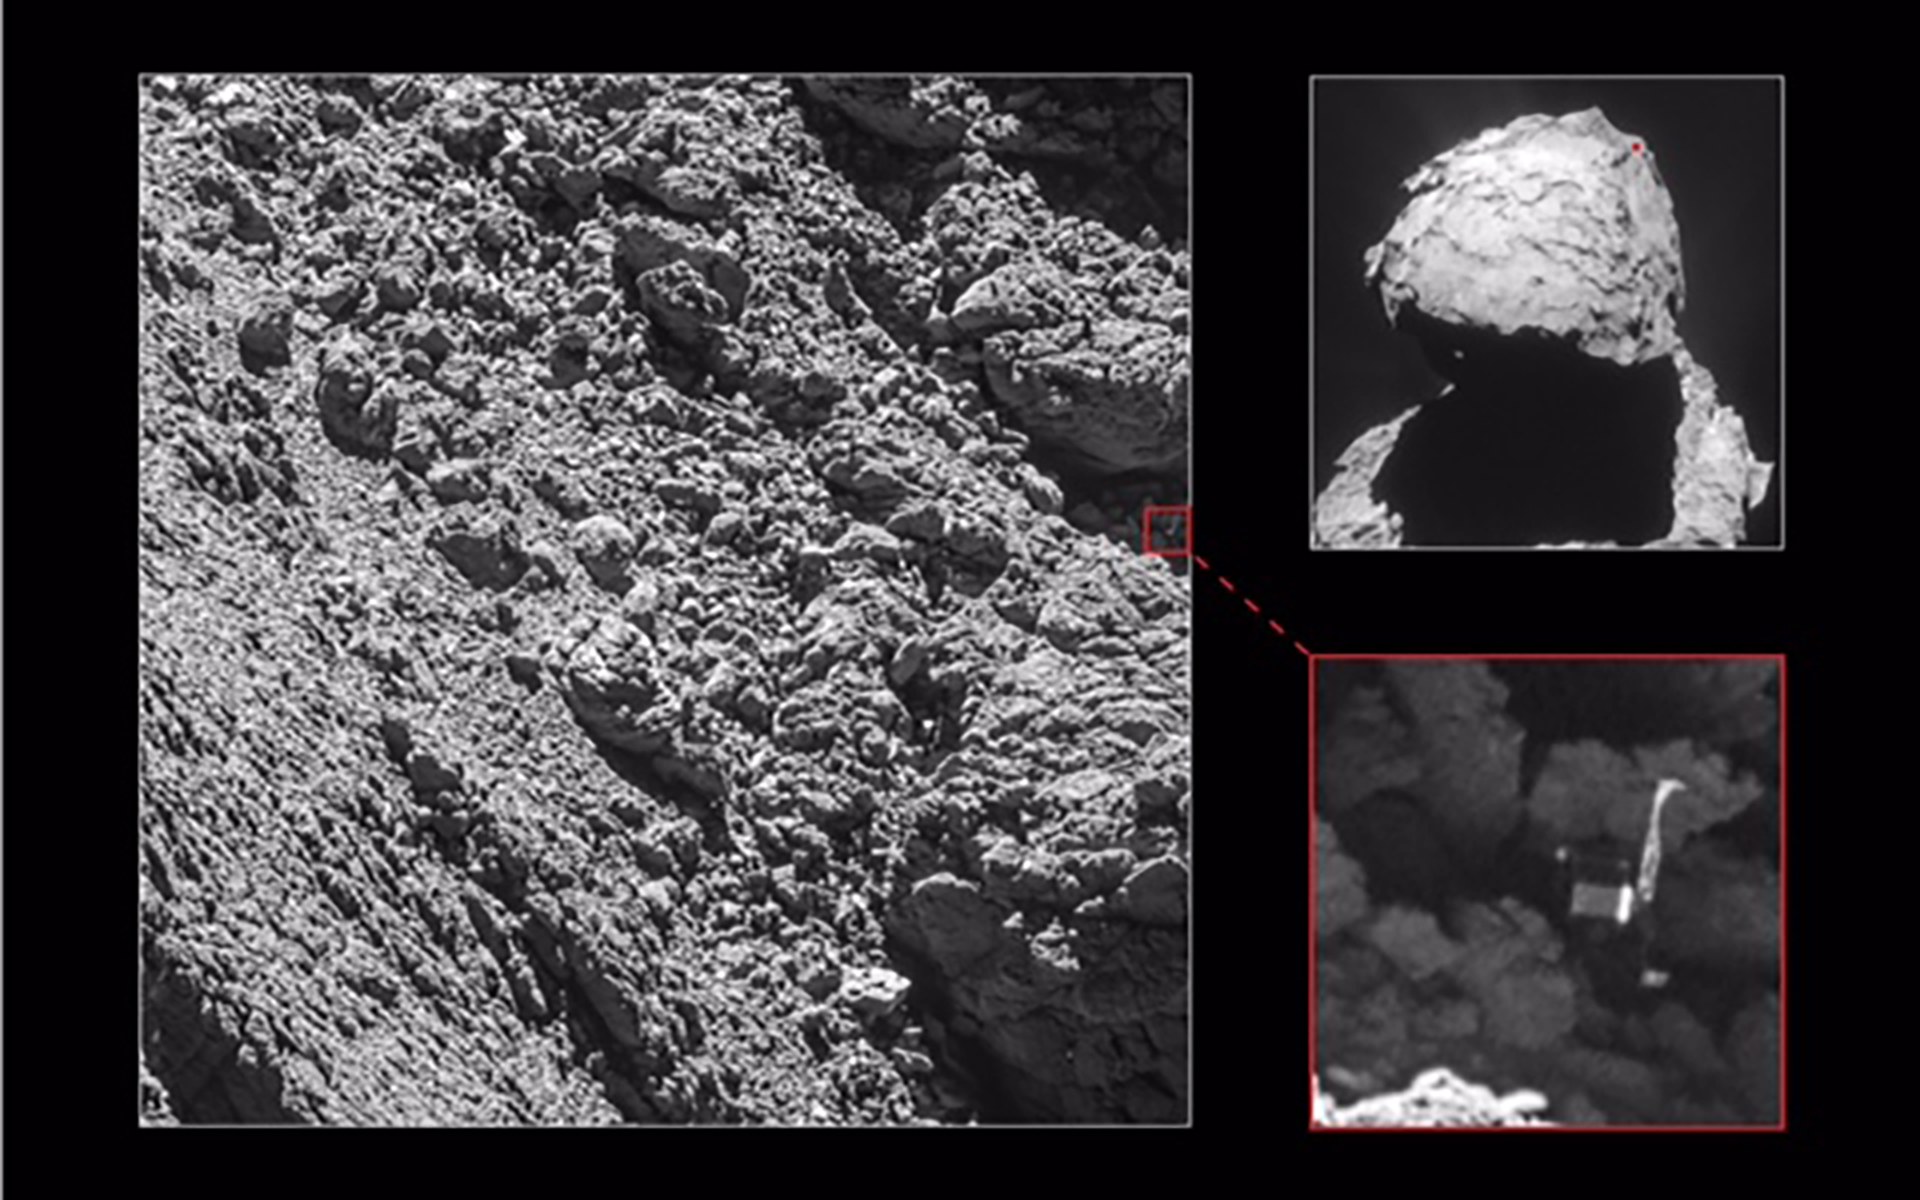 Near the end of the mission: Philae found!